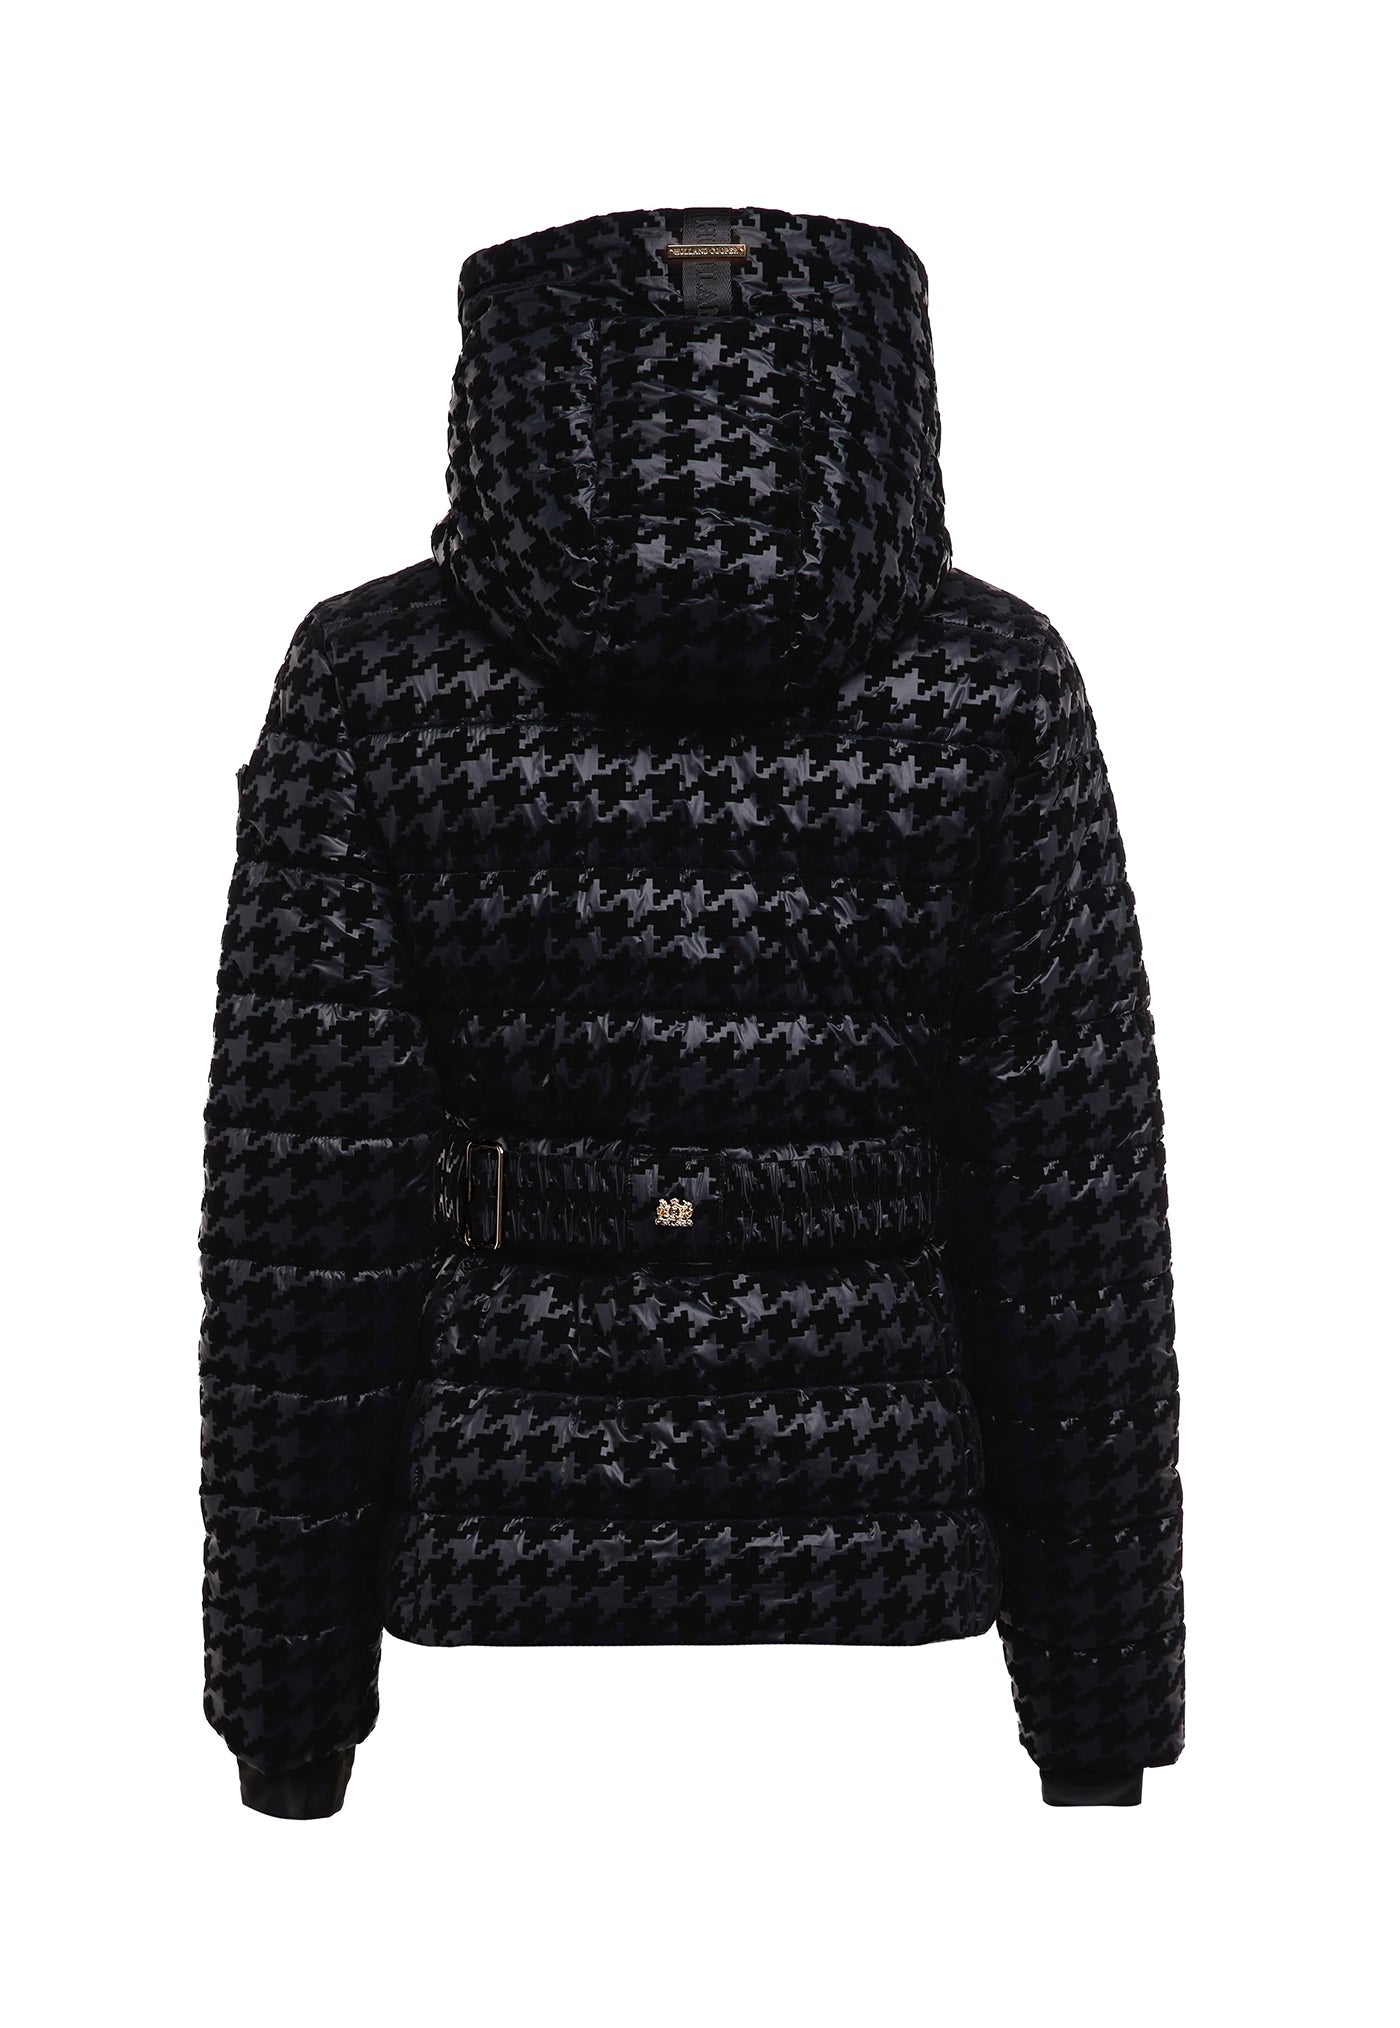 Vermont Puffer Jacket - Mono Houndstooth sold by Angel Divine